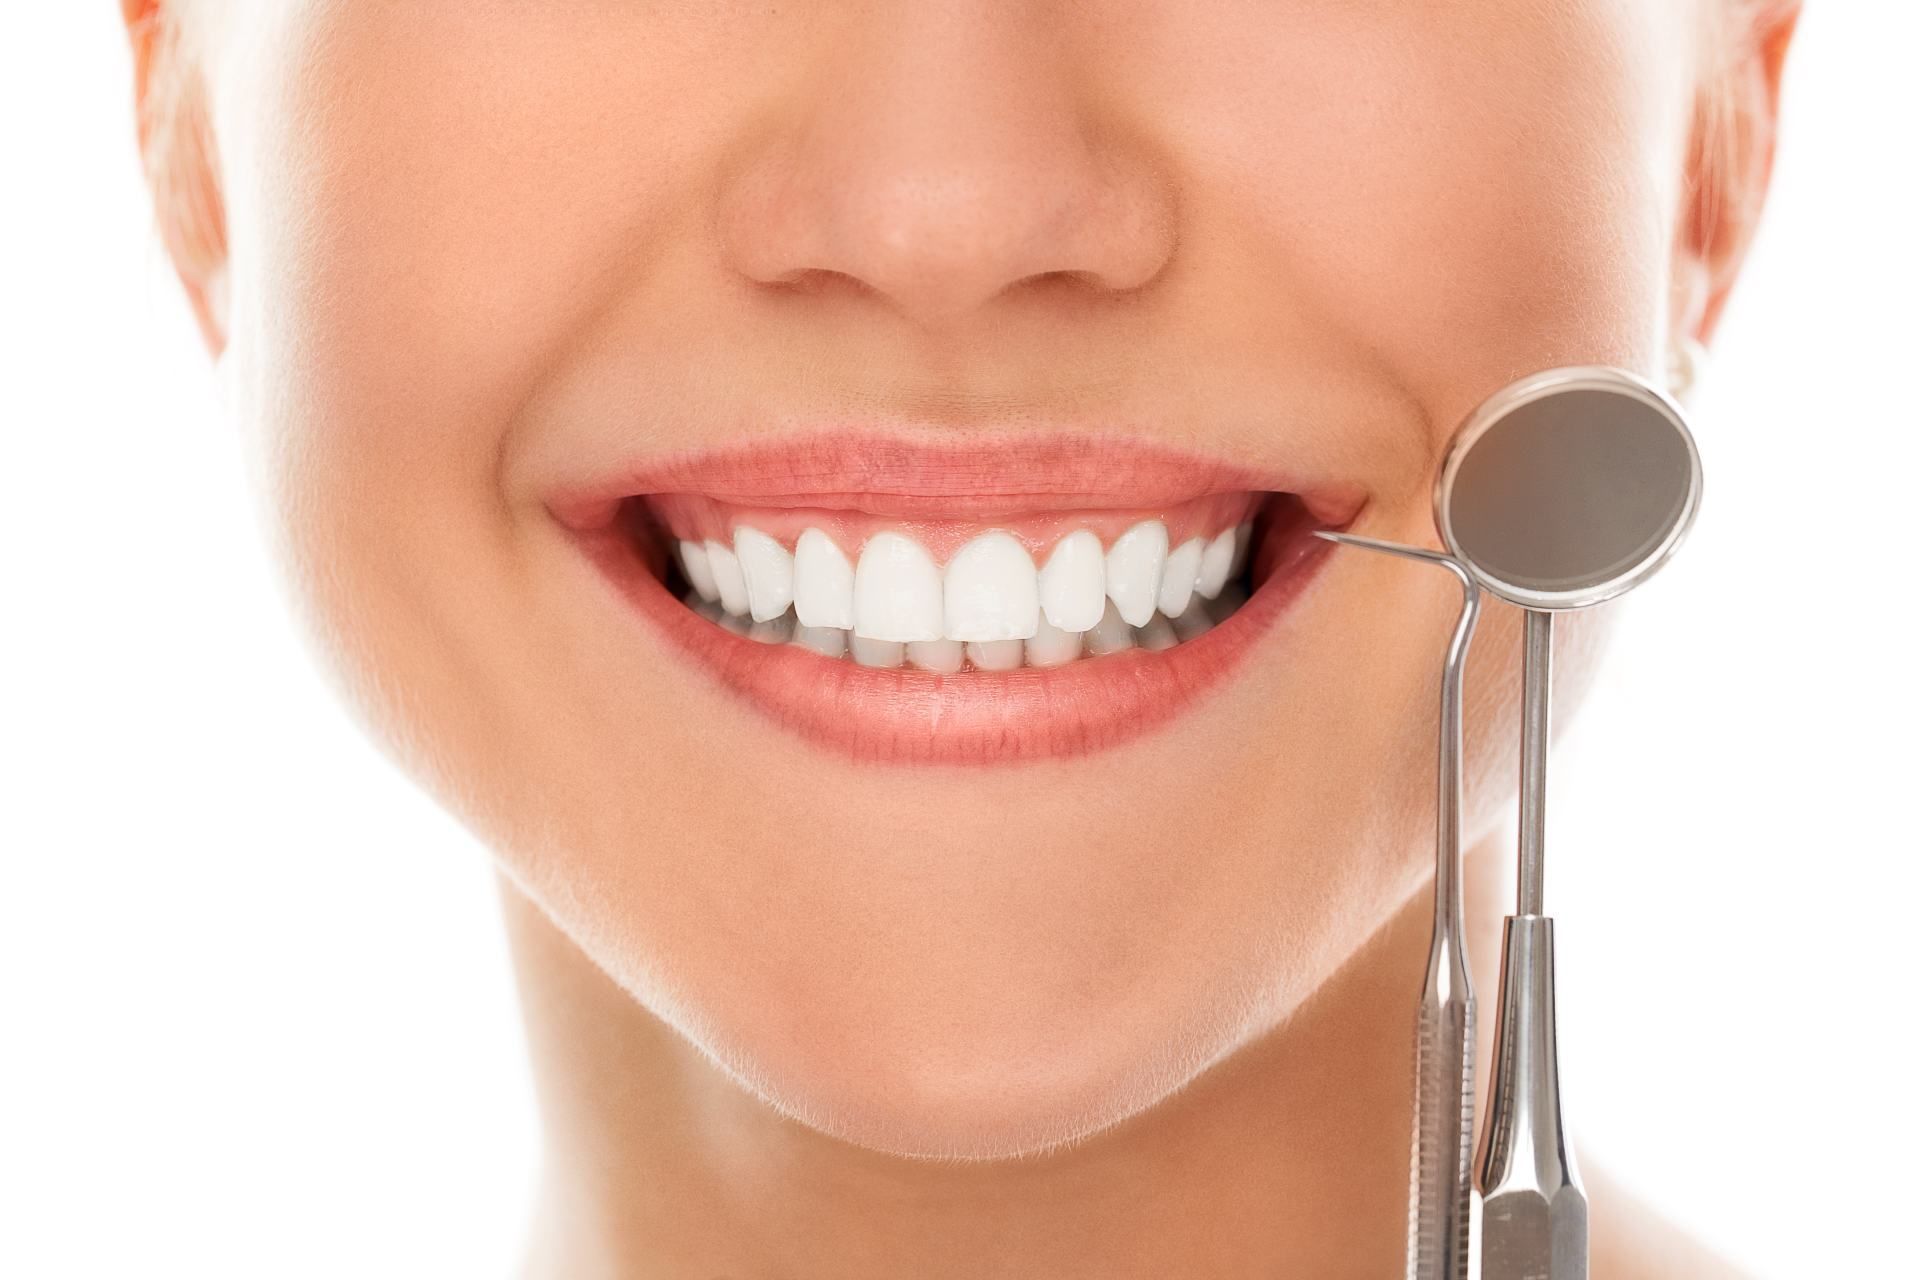 Woman with perfect teeth smiling next to dental tools | Whole Body Health